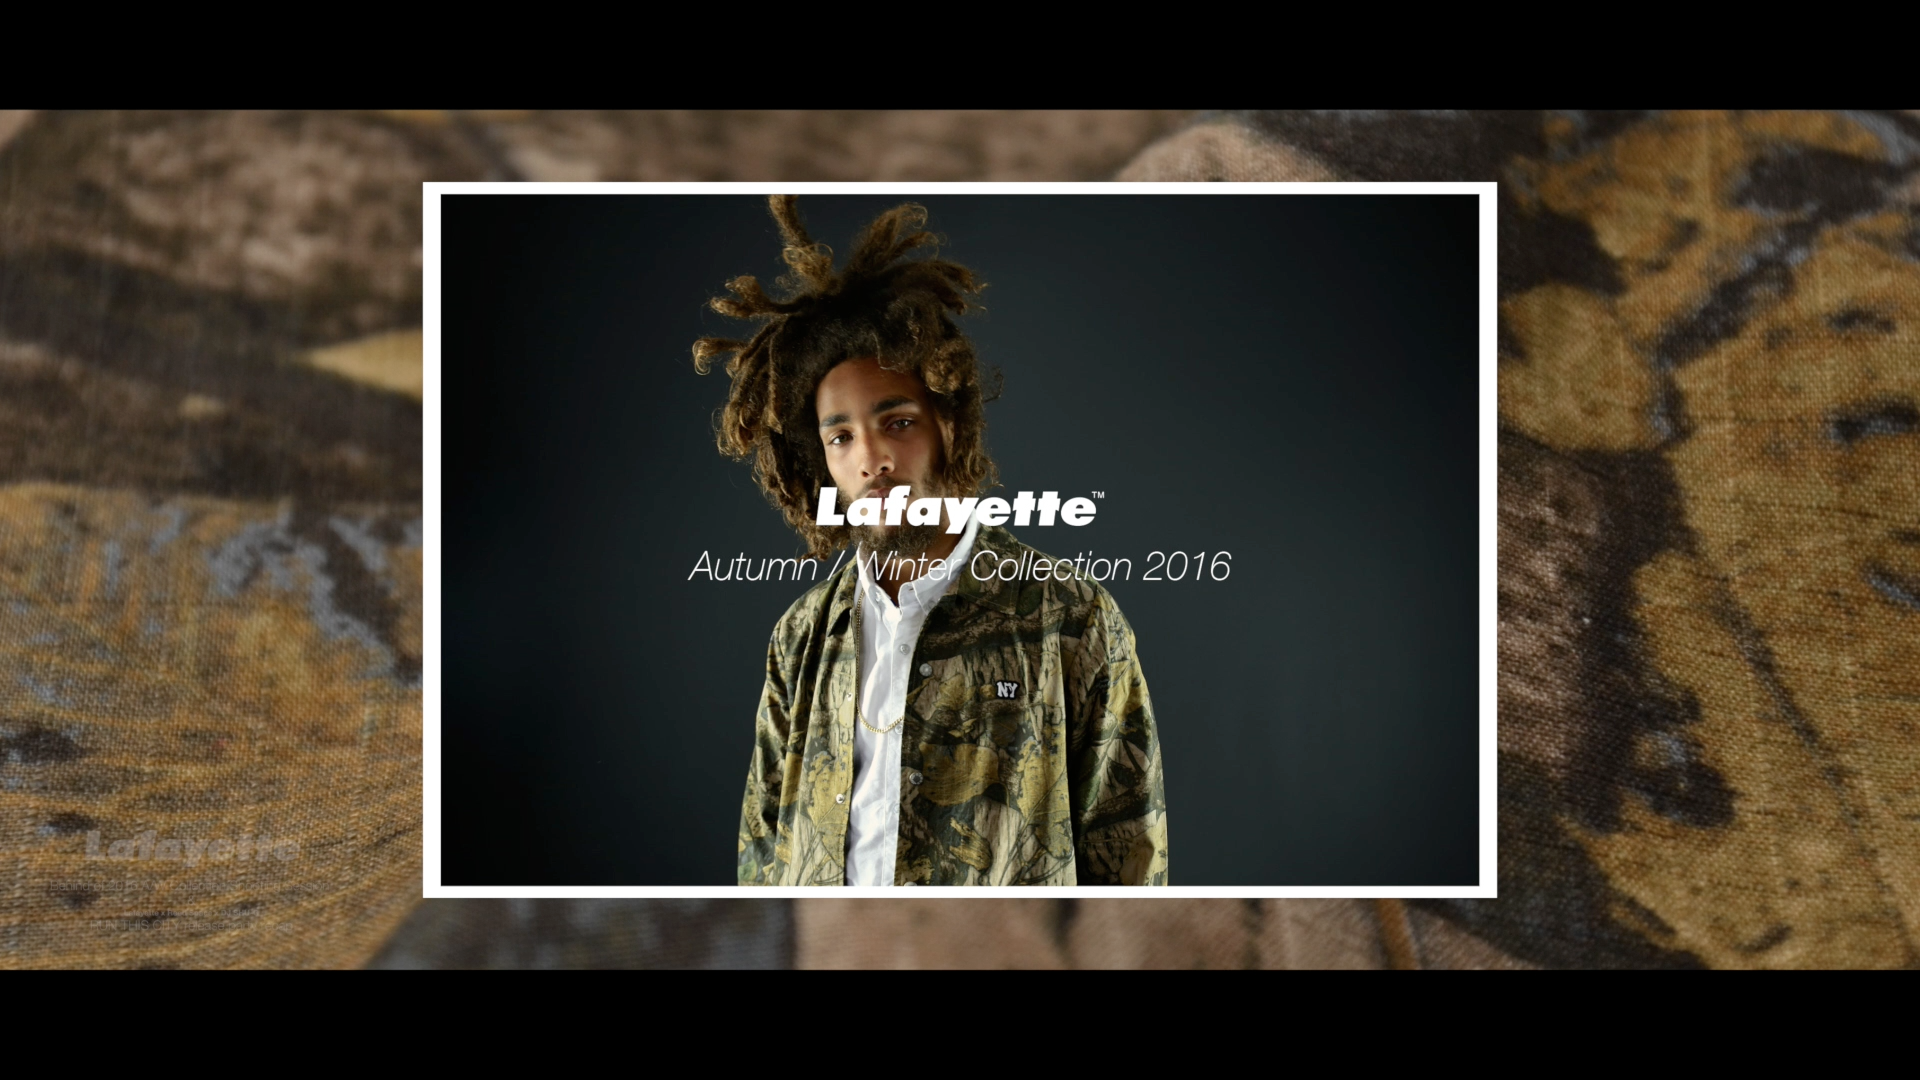 Behind of Lafayette 2016 A/W Collection Shooting Session & “RUN THIS CITY” release party recap